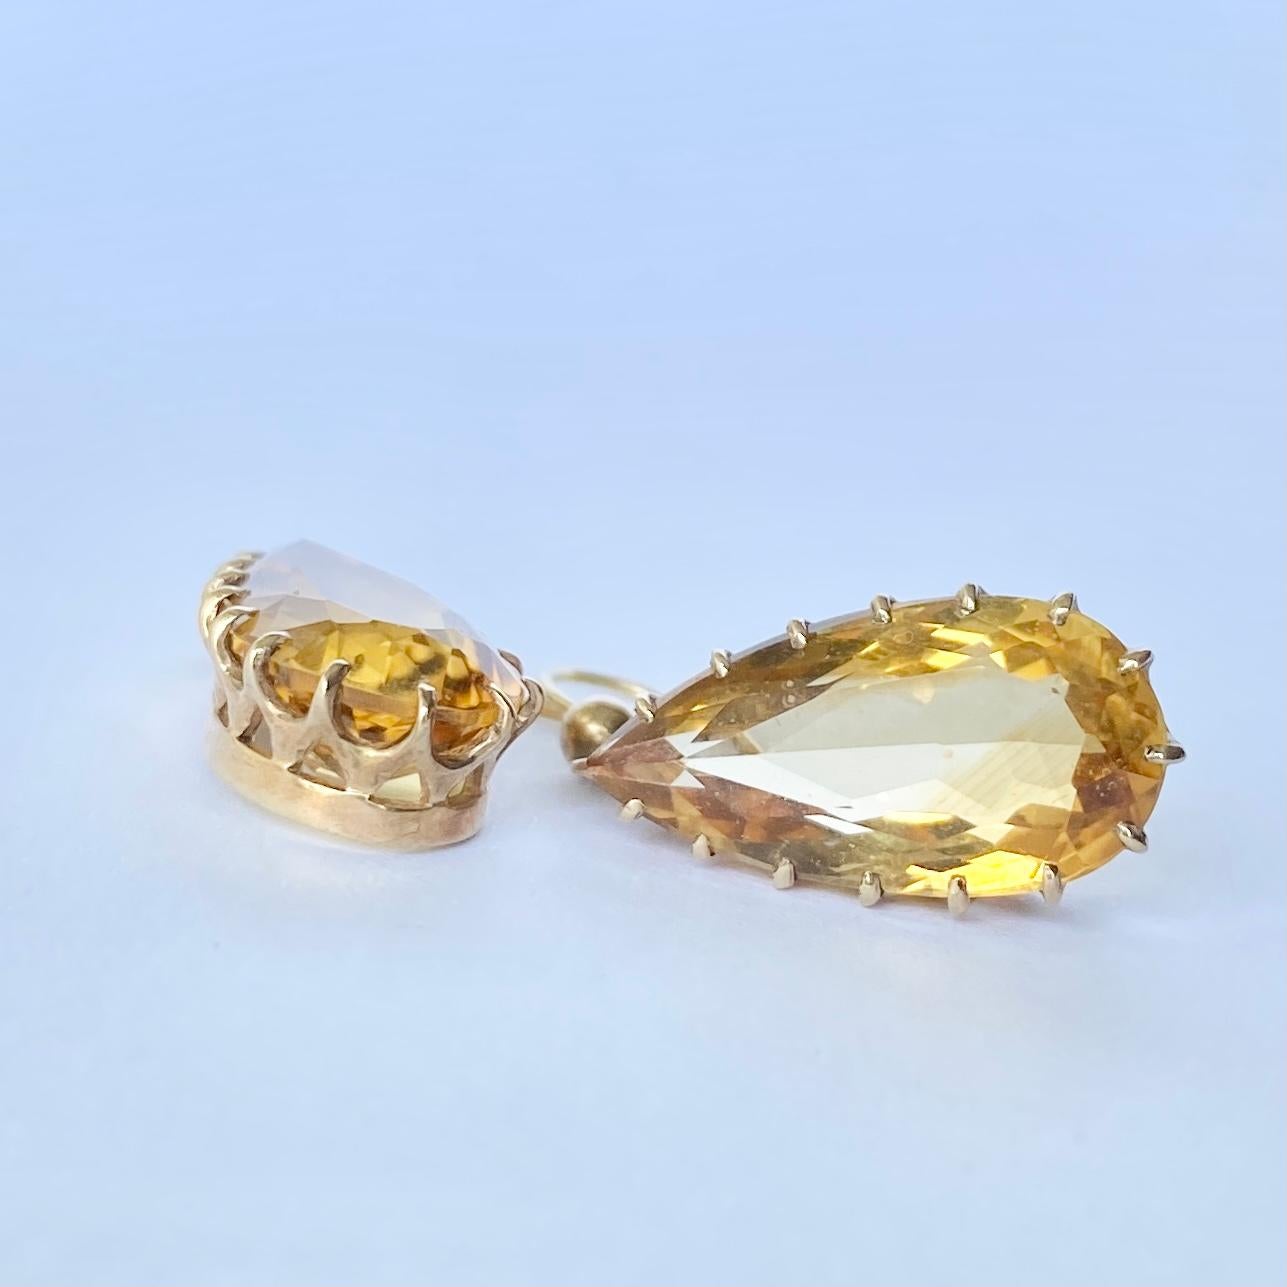 These gorgeous drop earrings feature a gorgeous bright pear drop citrine stone. The stones are encased in gold and attached using a shepherds hook.

Drop from ear: 32mm 

Weight: 4.2g